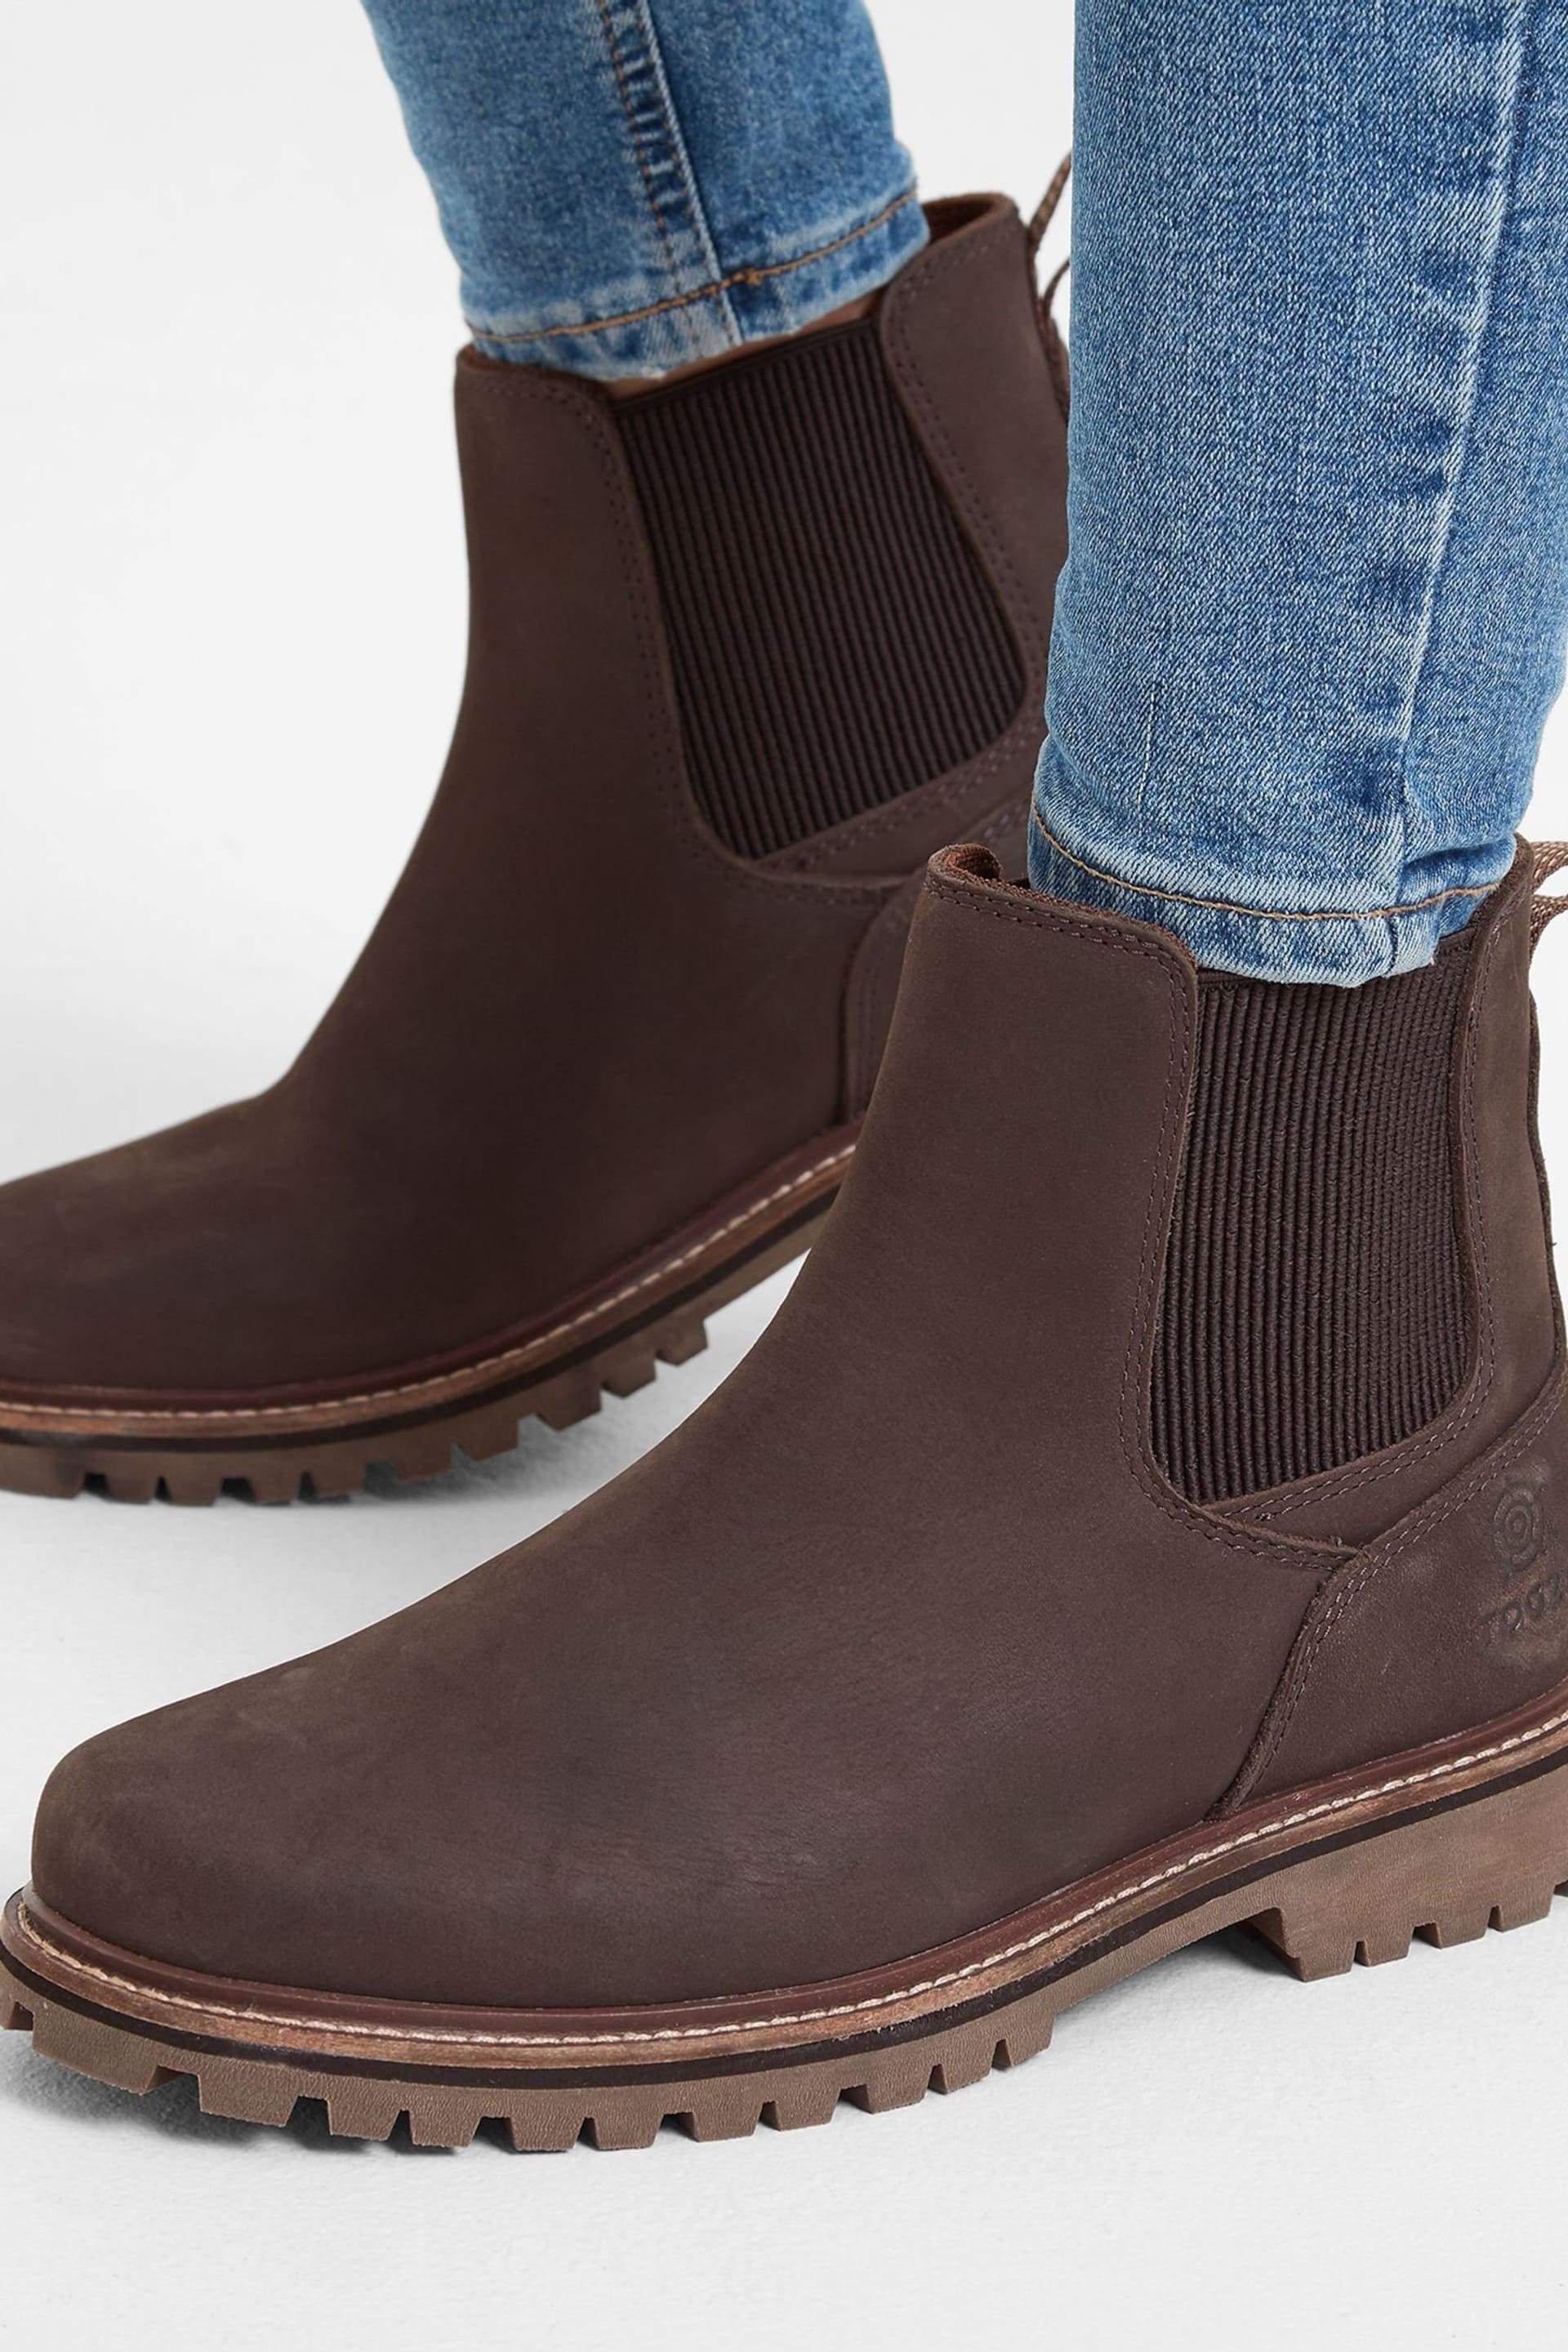 Tog 24 Brown Canyon Chelsea Boots - Image 1 of 2